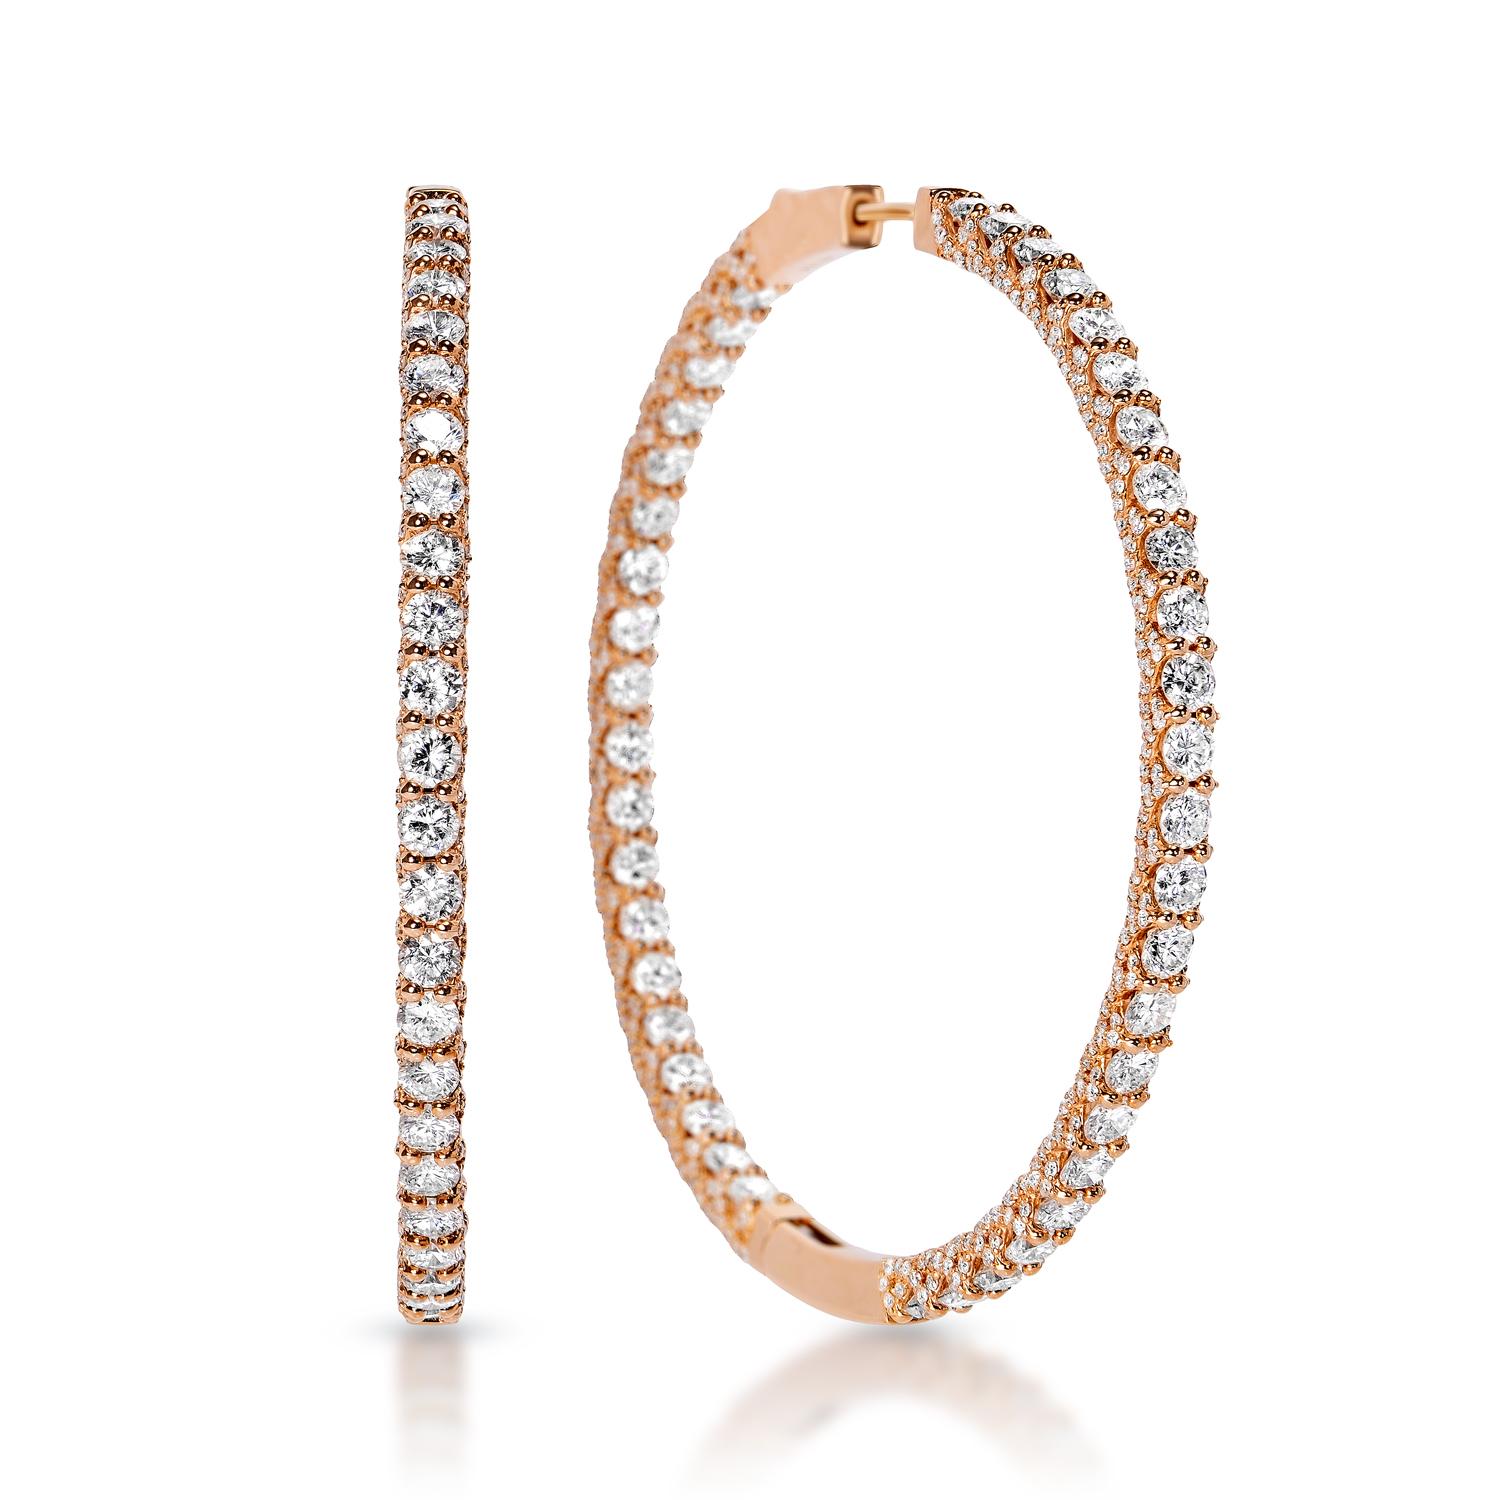 Keyla Encrusted wave 1.75 inch diameter 9 Carat Round Brilliant Diamond Hoop Earrings in 14k Rose Gold

Diamond Hoop Earrings:
Large diamond inside and out and also small Micro Pave diamonds on the sides on the prongs.


Carat Weight: 9